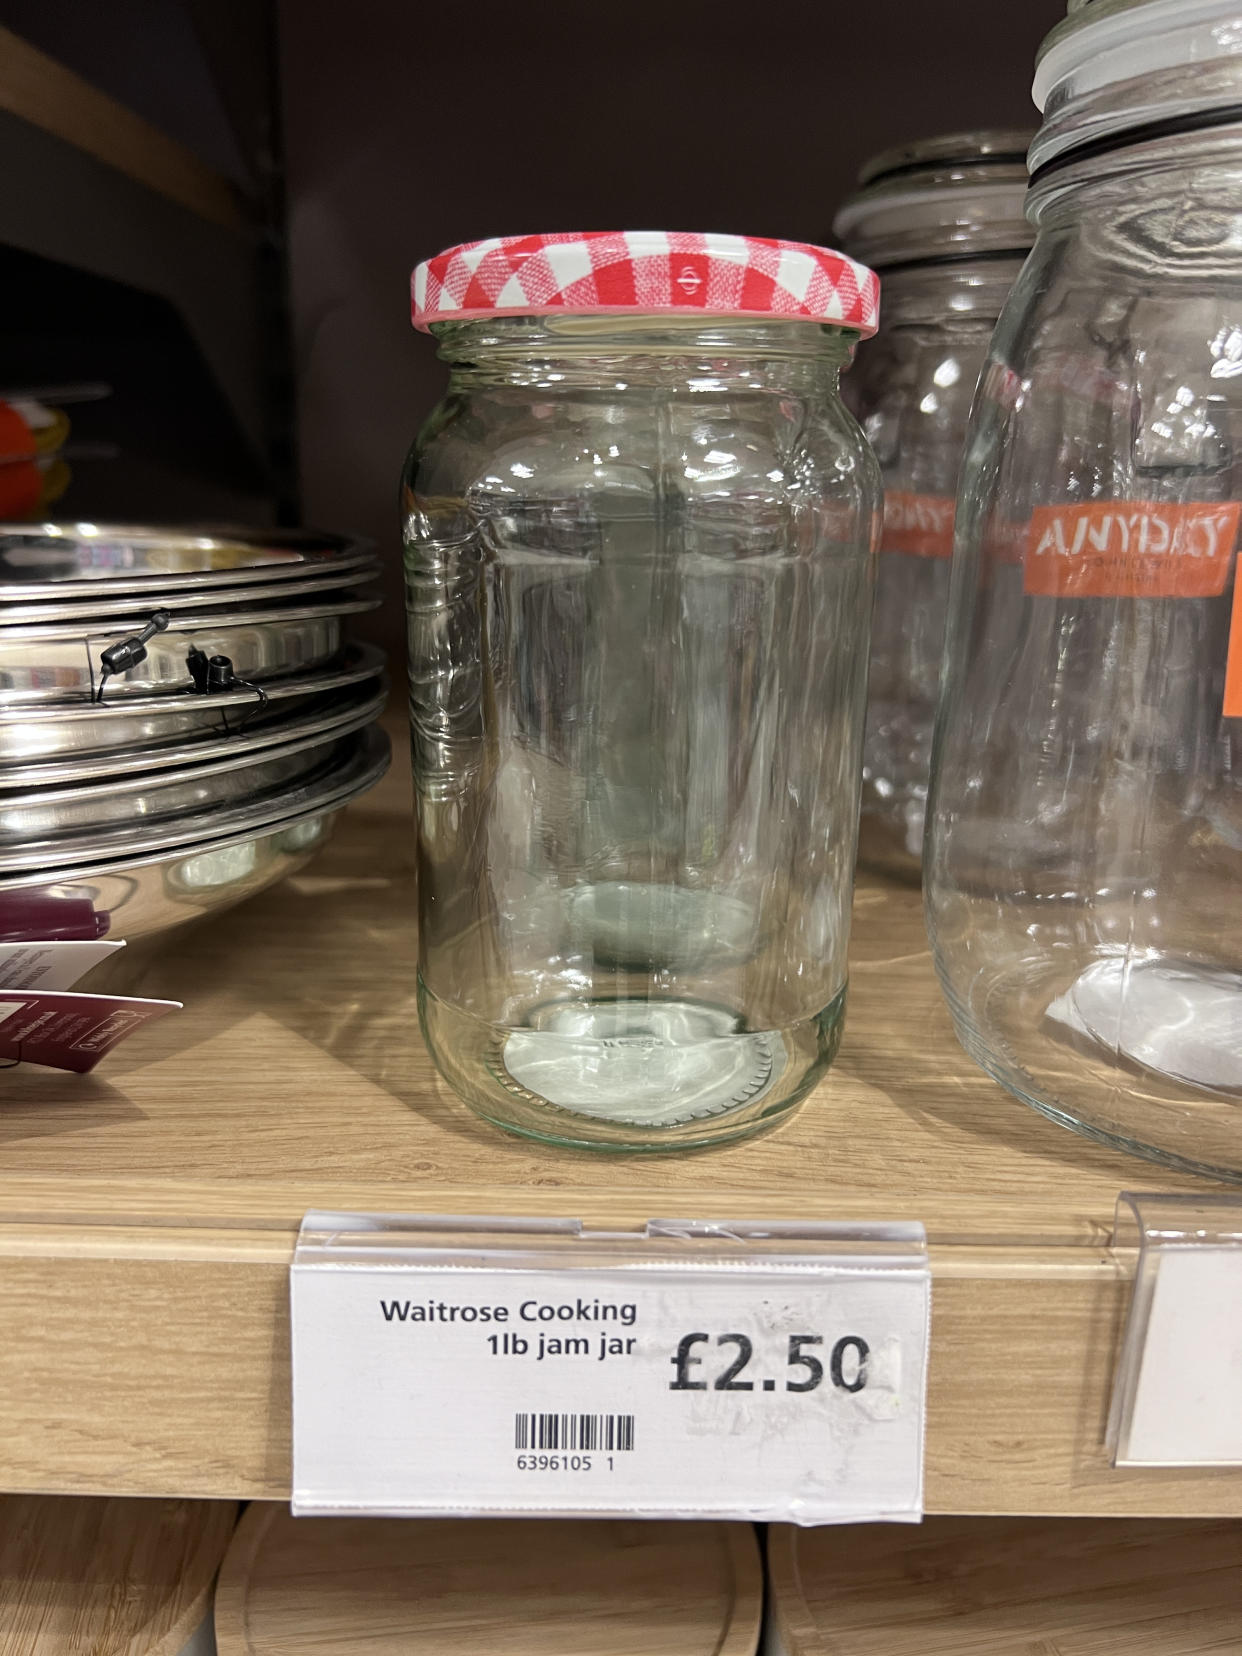 The situation is the same in 2023 - with a jar of Waitrose own brand of strawberry jam costing ££1.20 compared to an empty jam jar which will set you back £2.50. (SWNS)